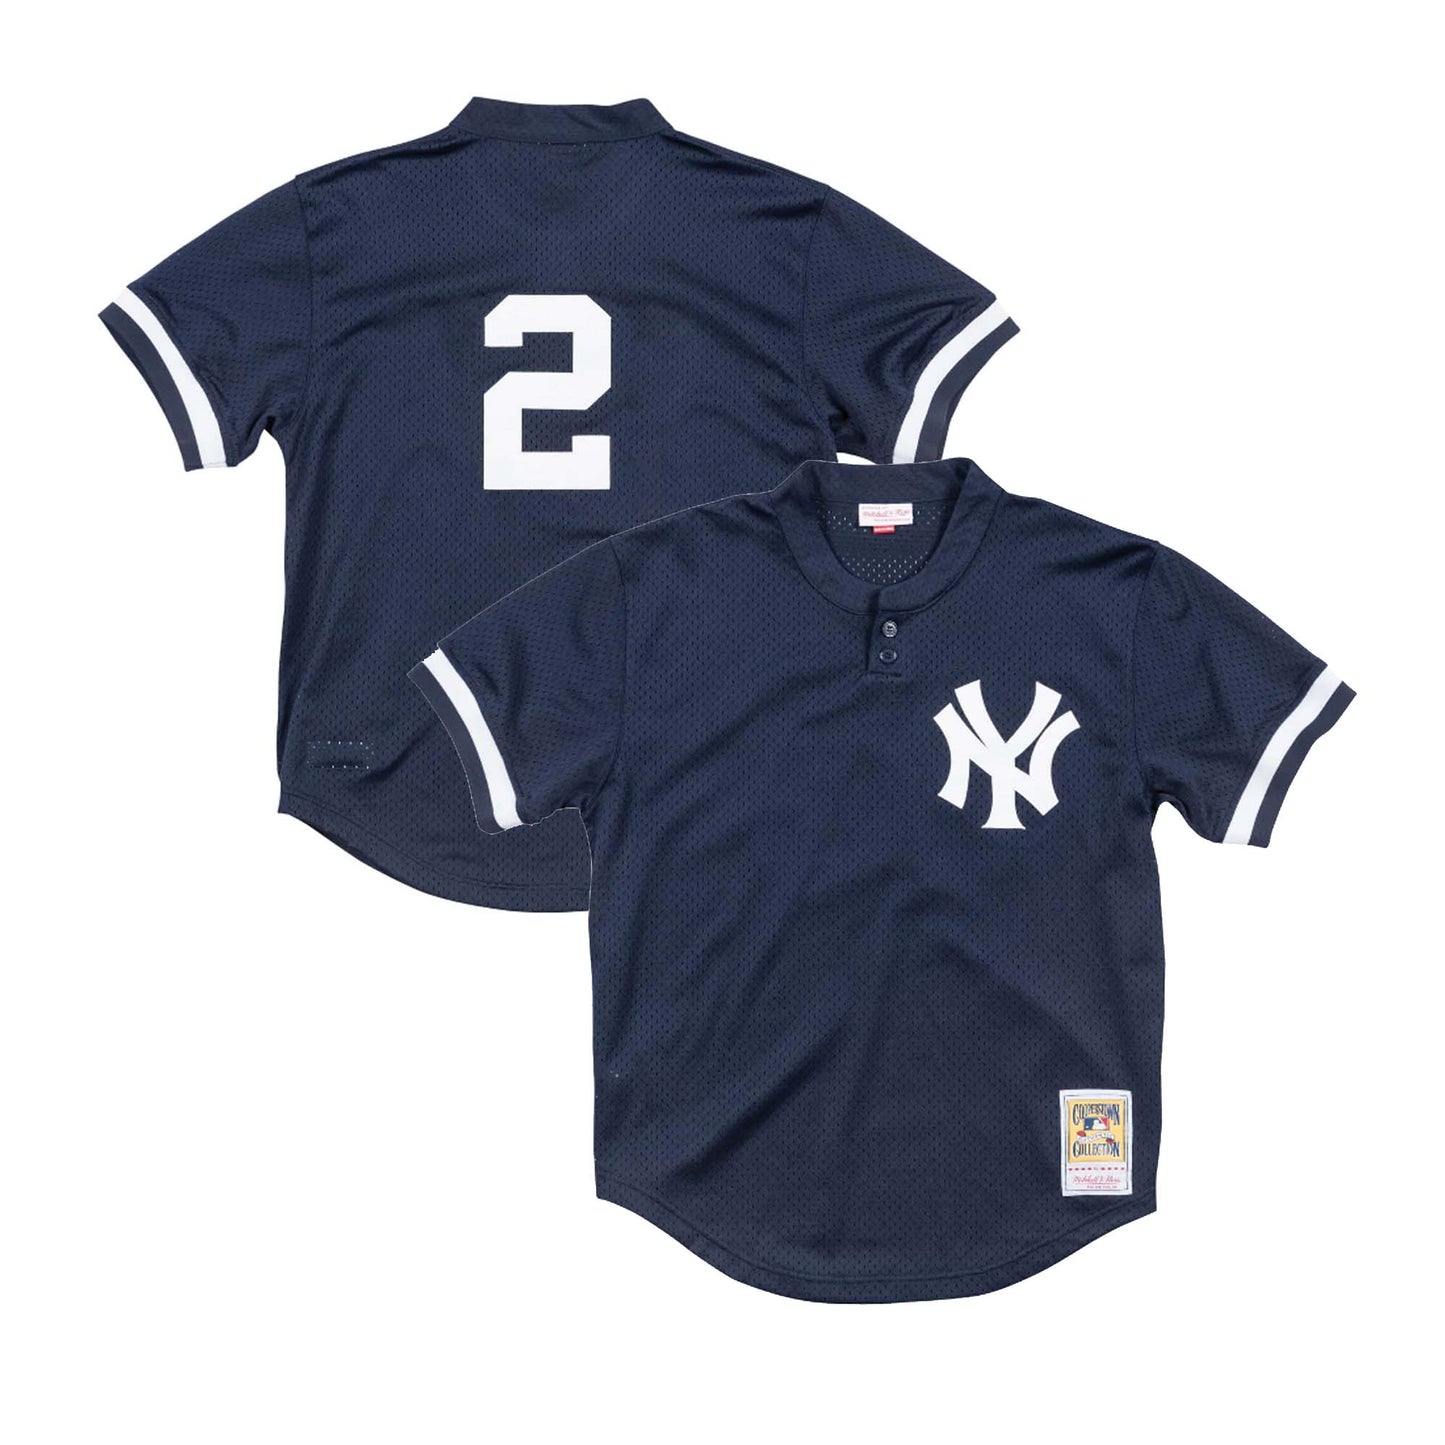 Authentic Derek Jeter New York Yankees Home 1997 Jersey - Shop Mitchell & Ness  Authentic Jerseys and Replicas Mitchell & Ness Nostalgia Co.